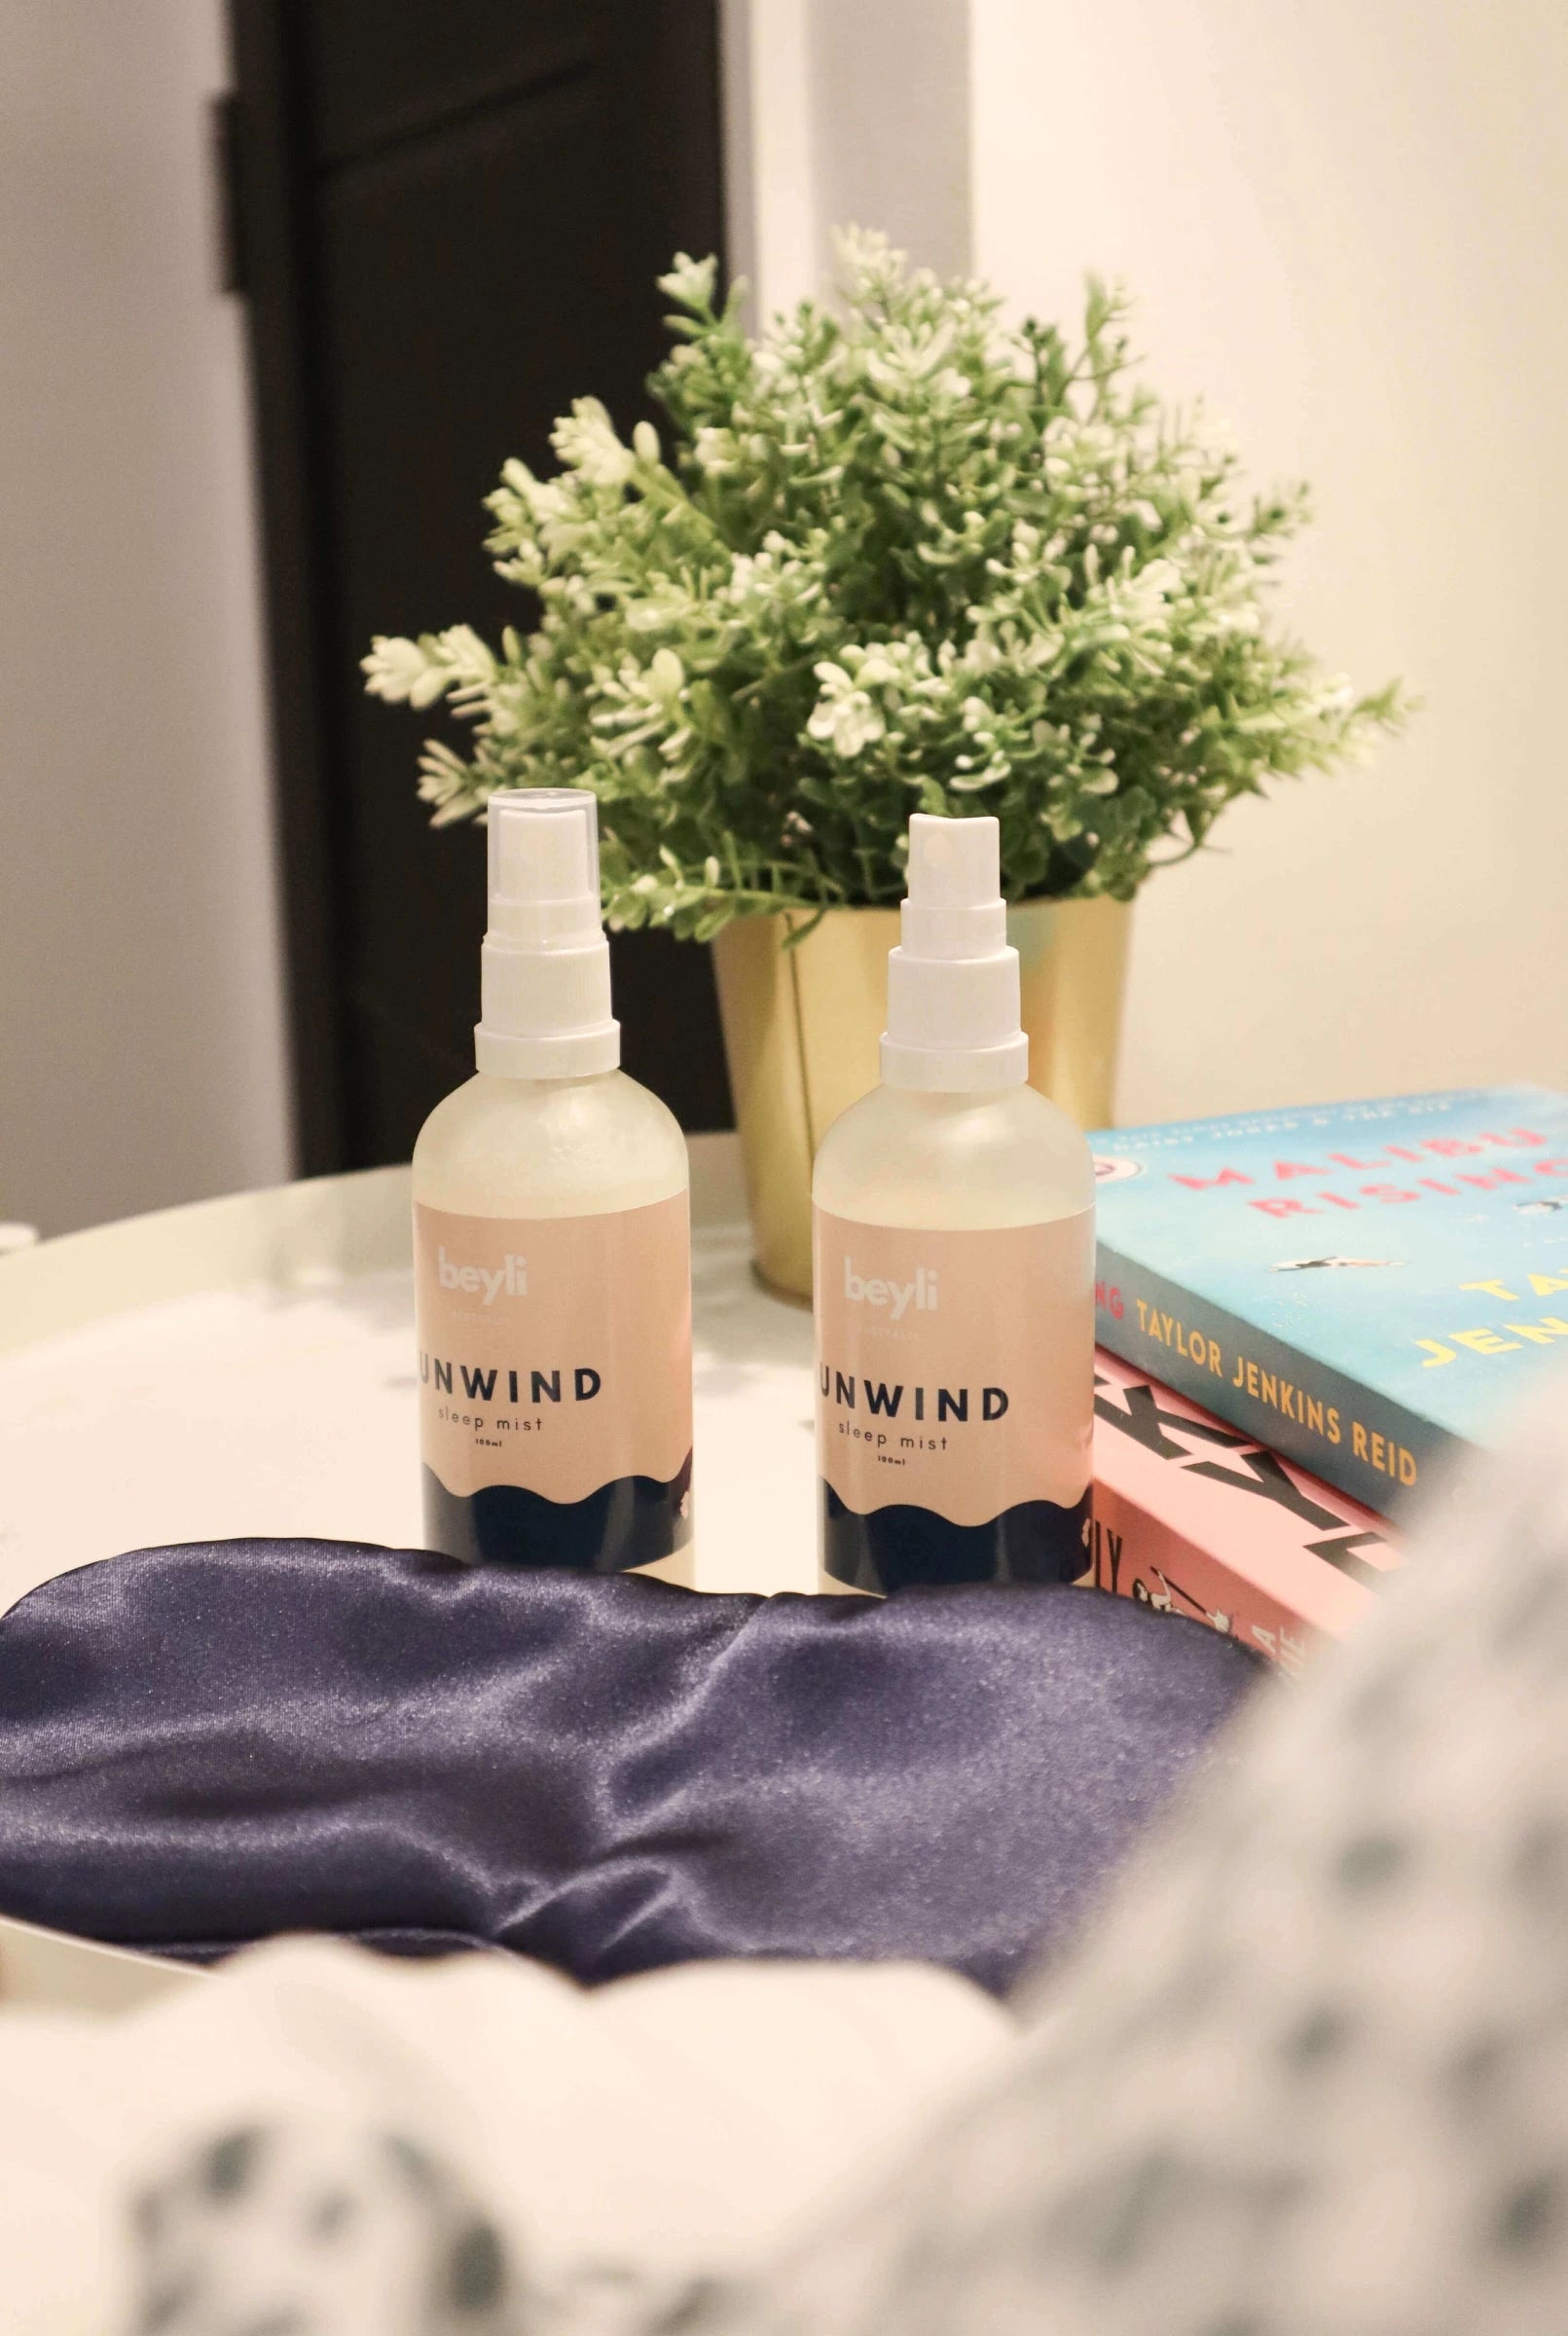 A nighttime routine set with sleep mist and a book on a bedside surface